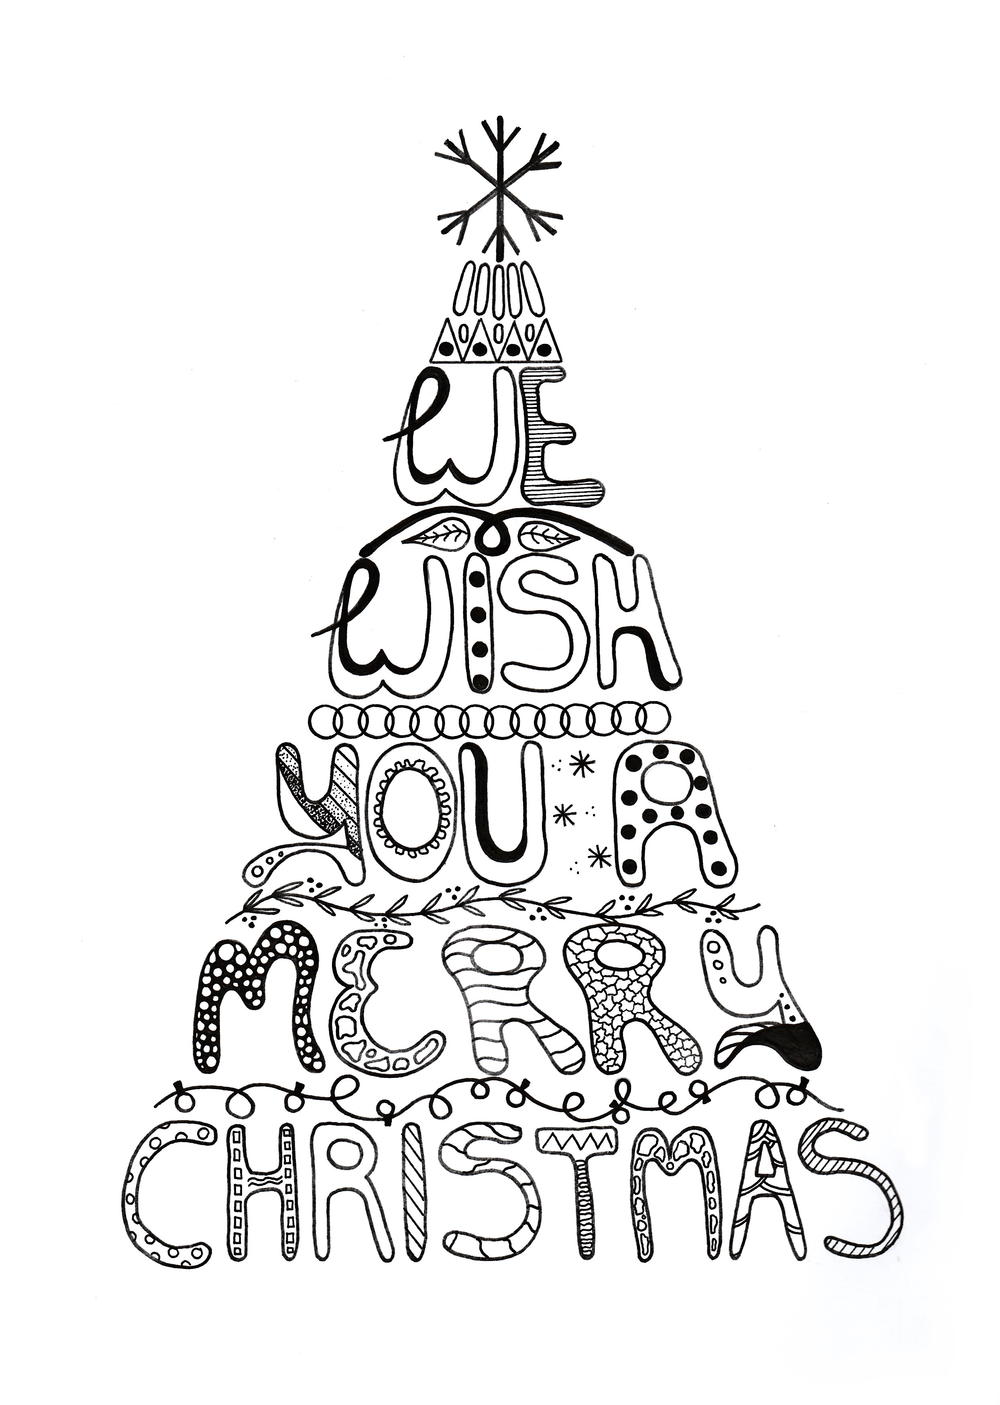 Merry Christmas Adult Coloring Page   AllFreePaperCrafts.com